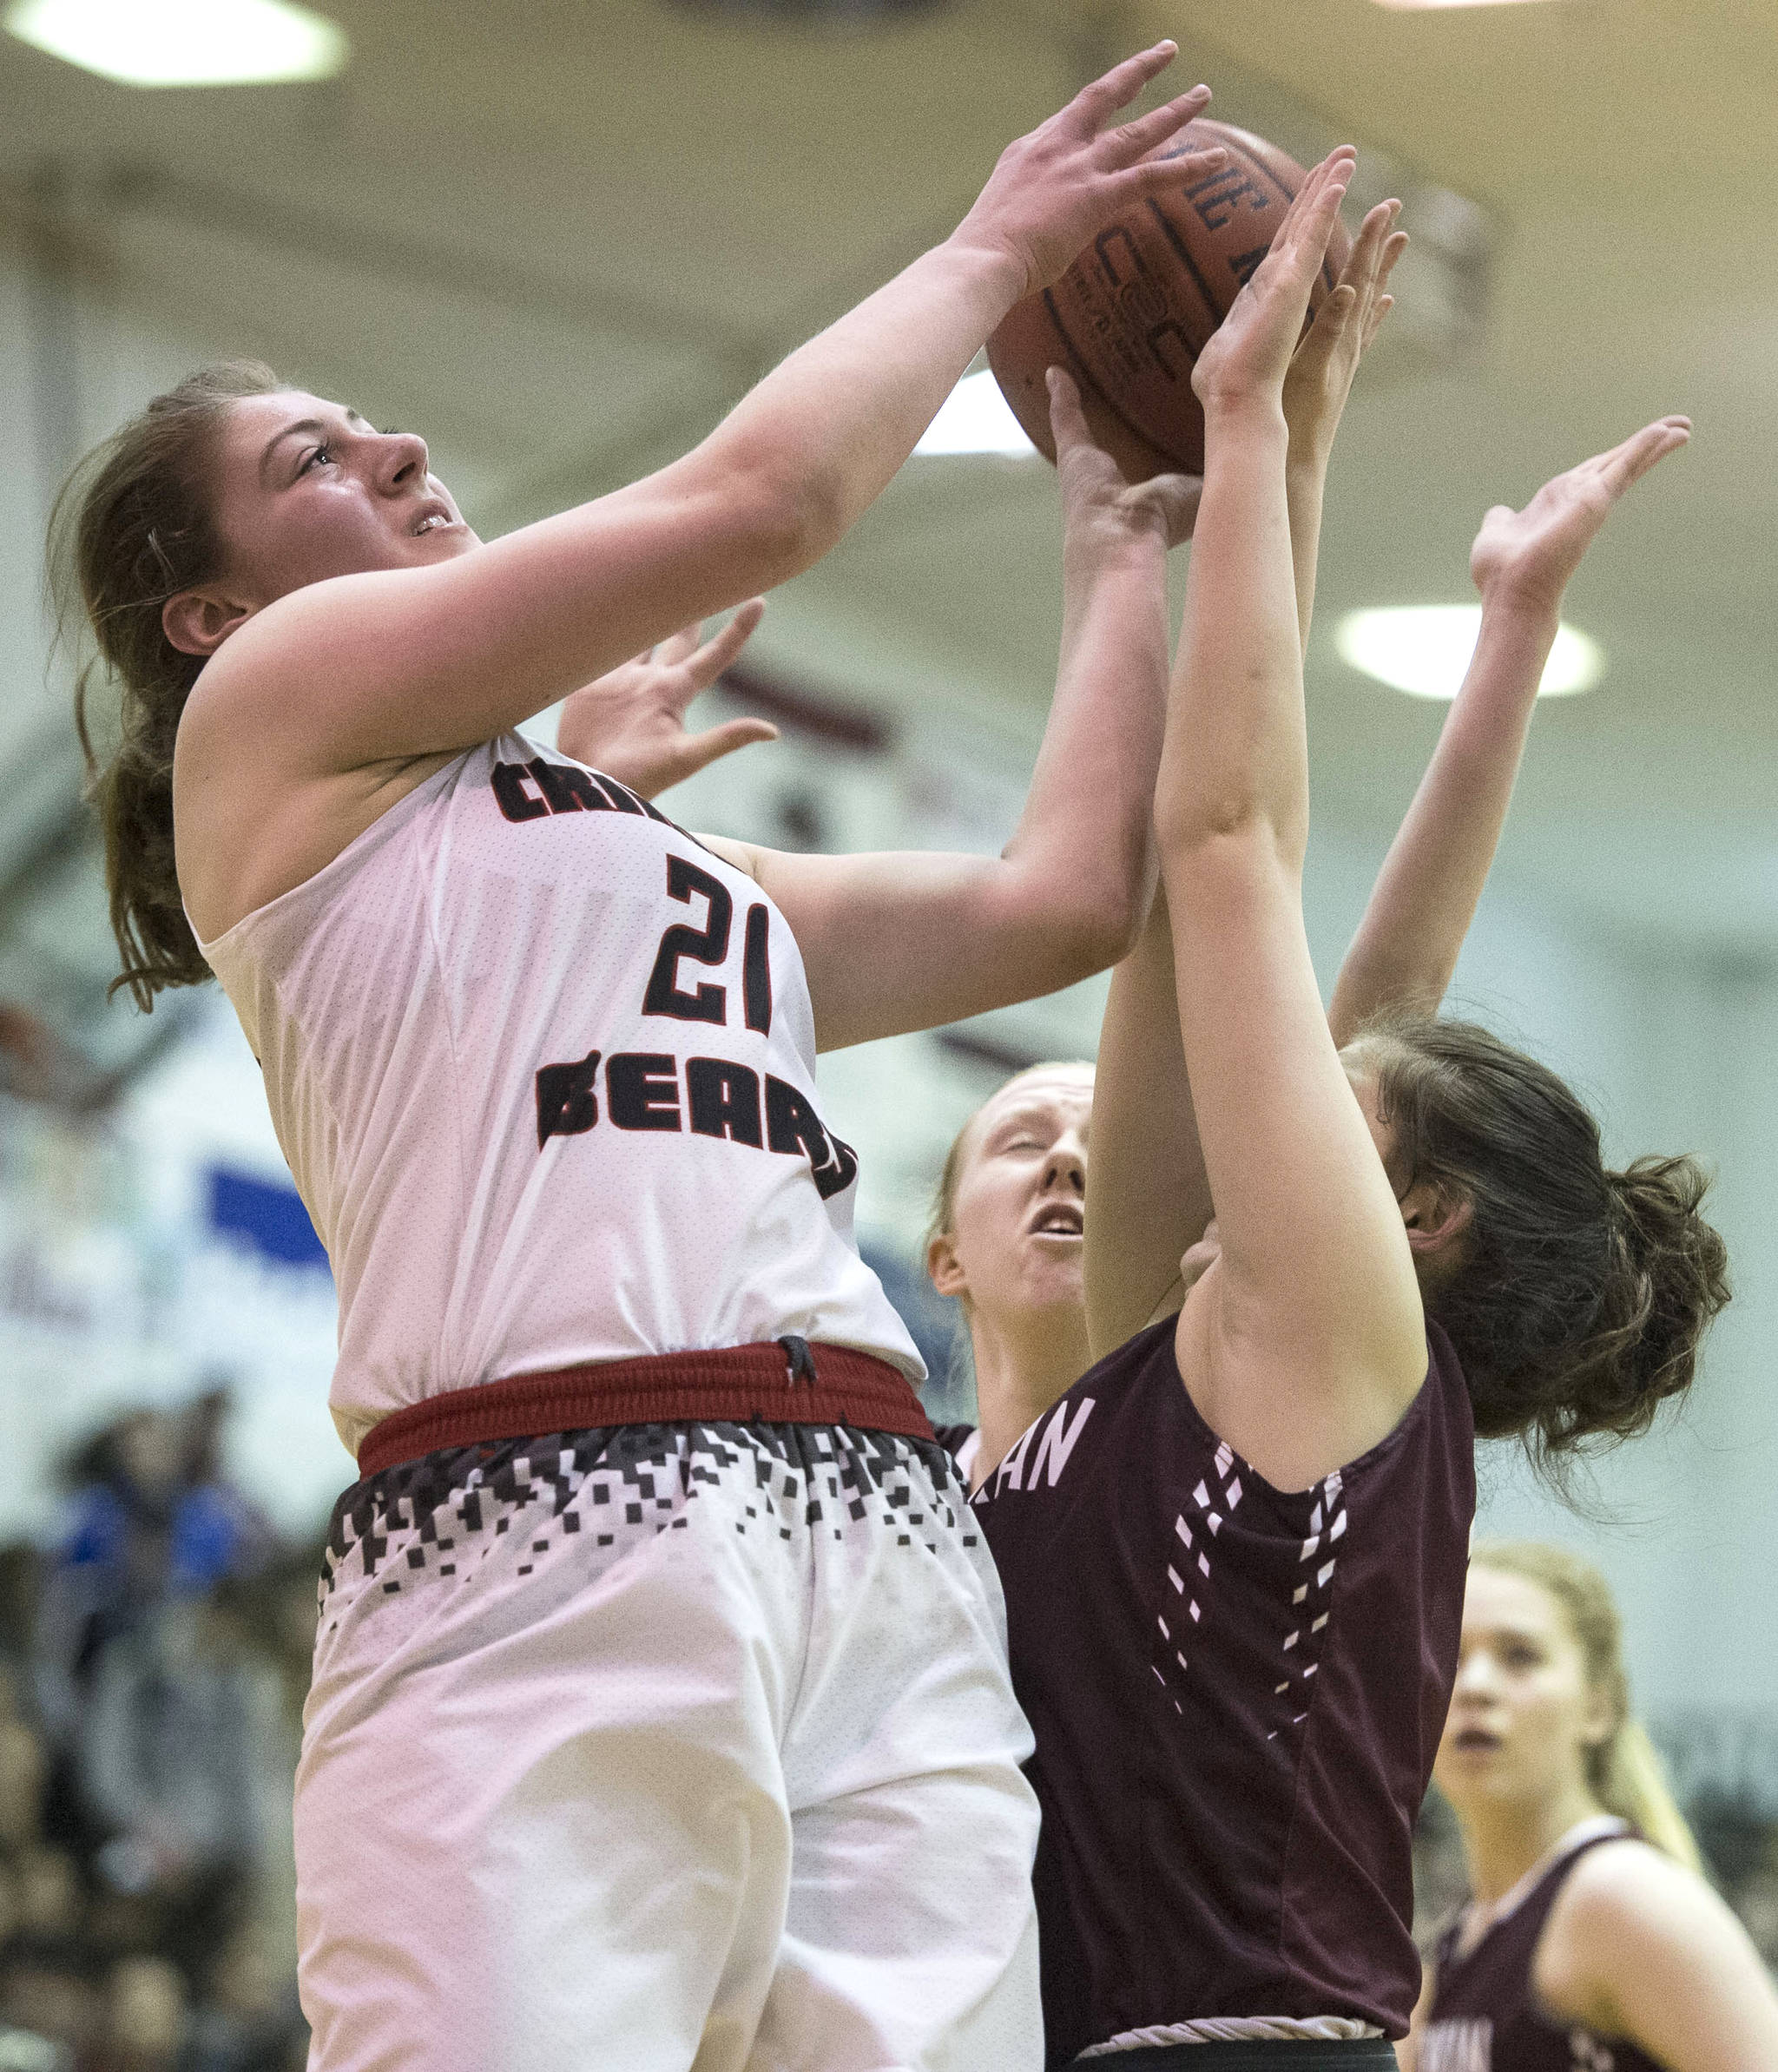 Michael Penn / Juneau Empire File
Juneau-Douglas’s Cassie Dzinich, left, shoots against Ketchikan during the Region V Basketball finals at JDHS on March 10, 2017. Ketchikan won 41-39 to force a playoff game the next day.